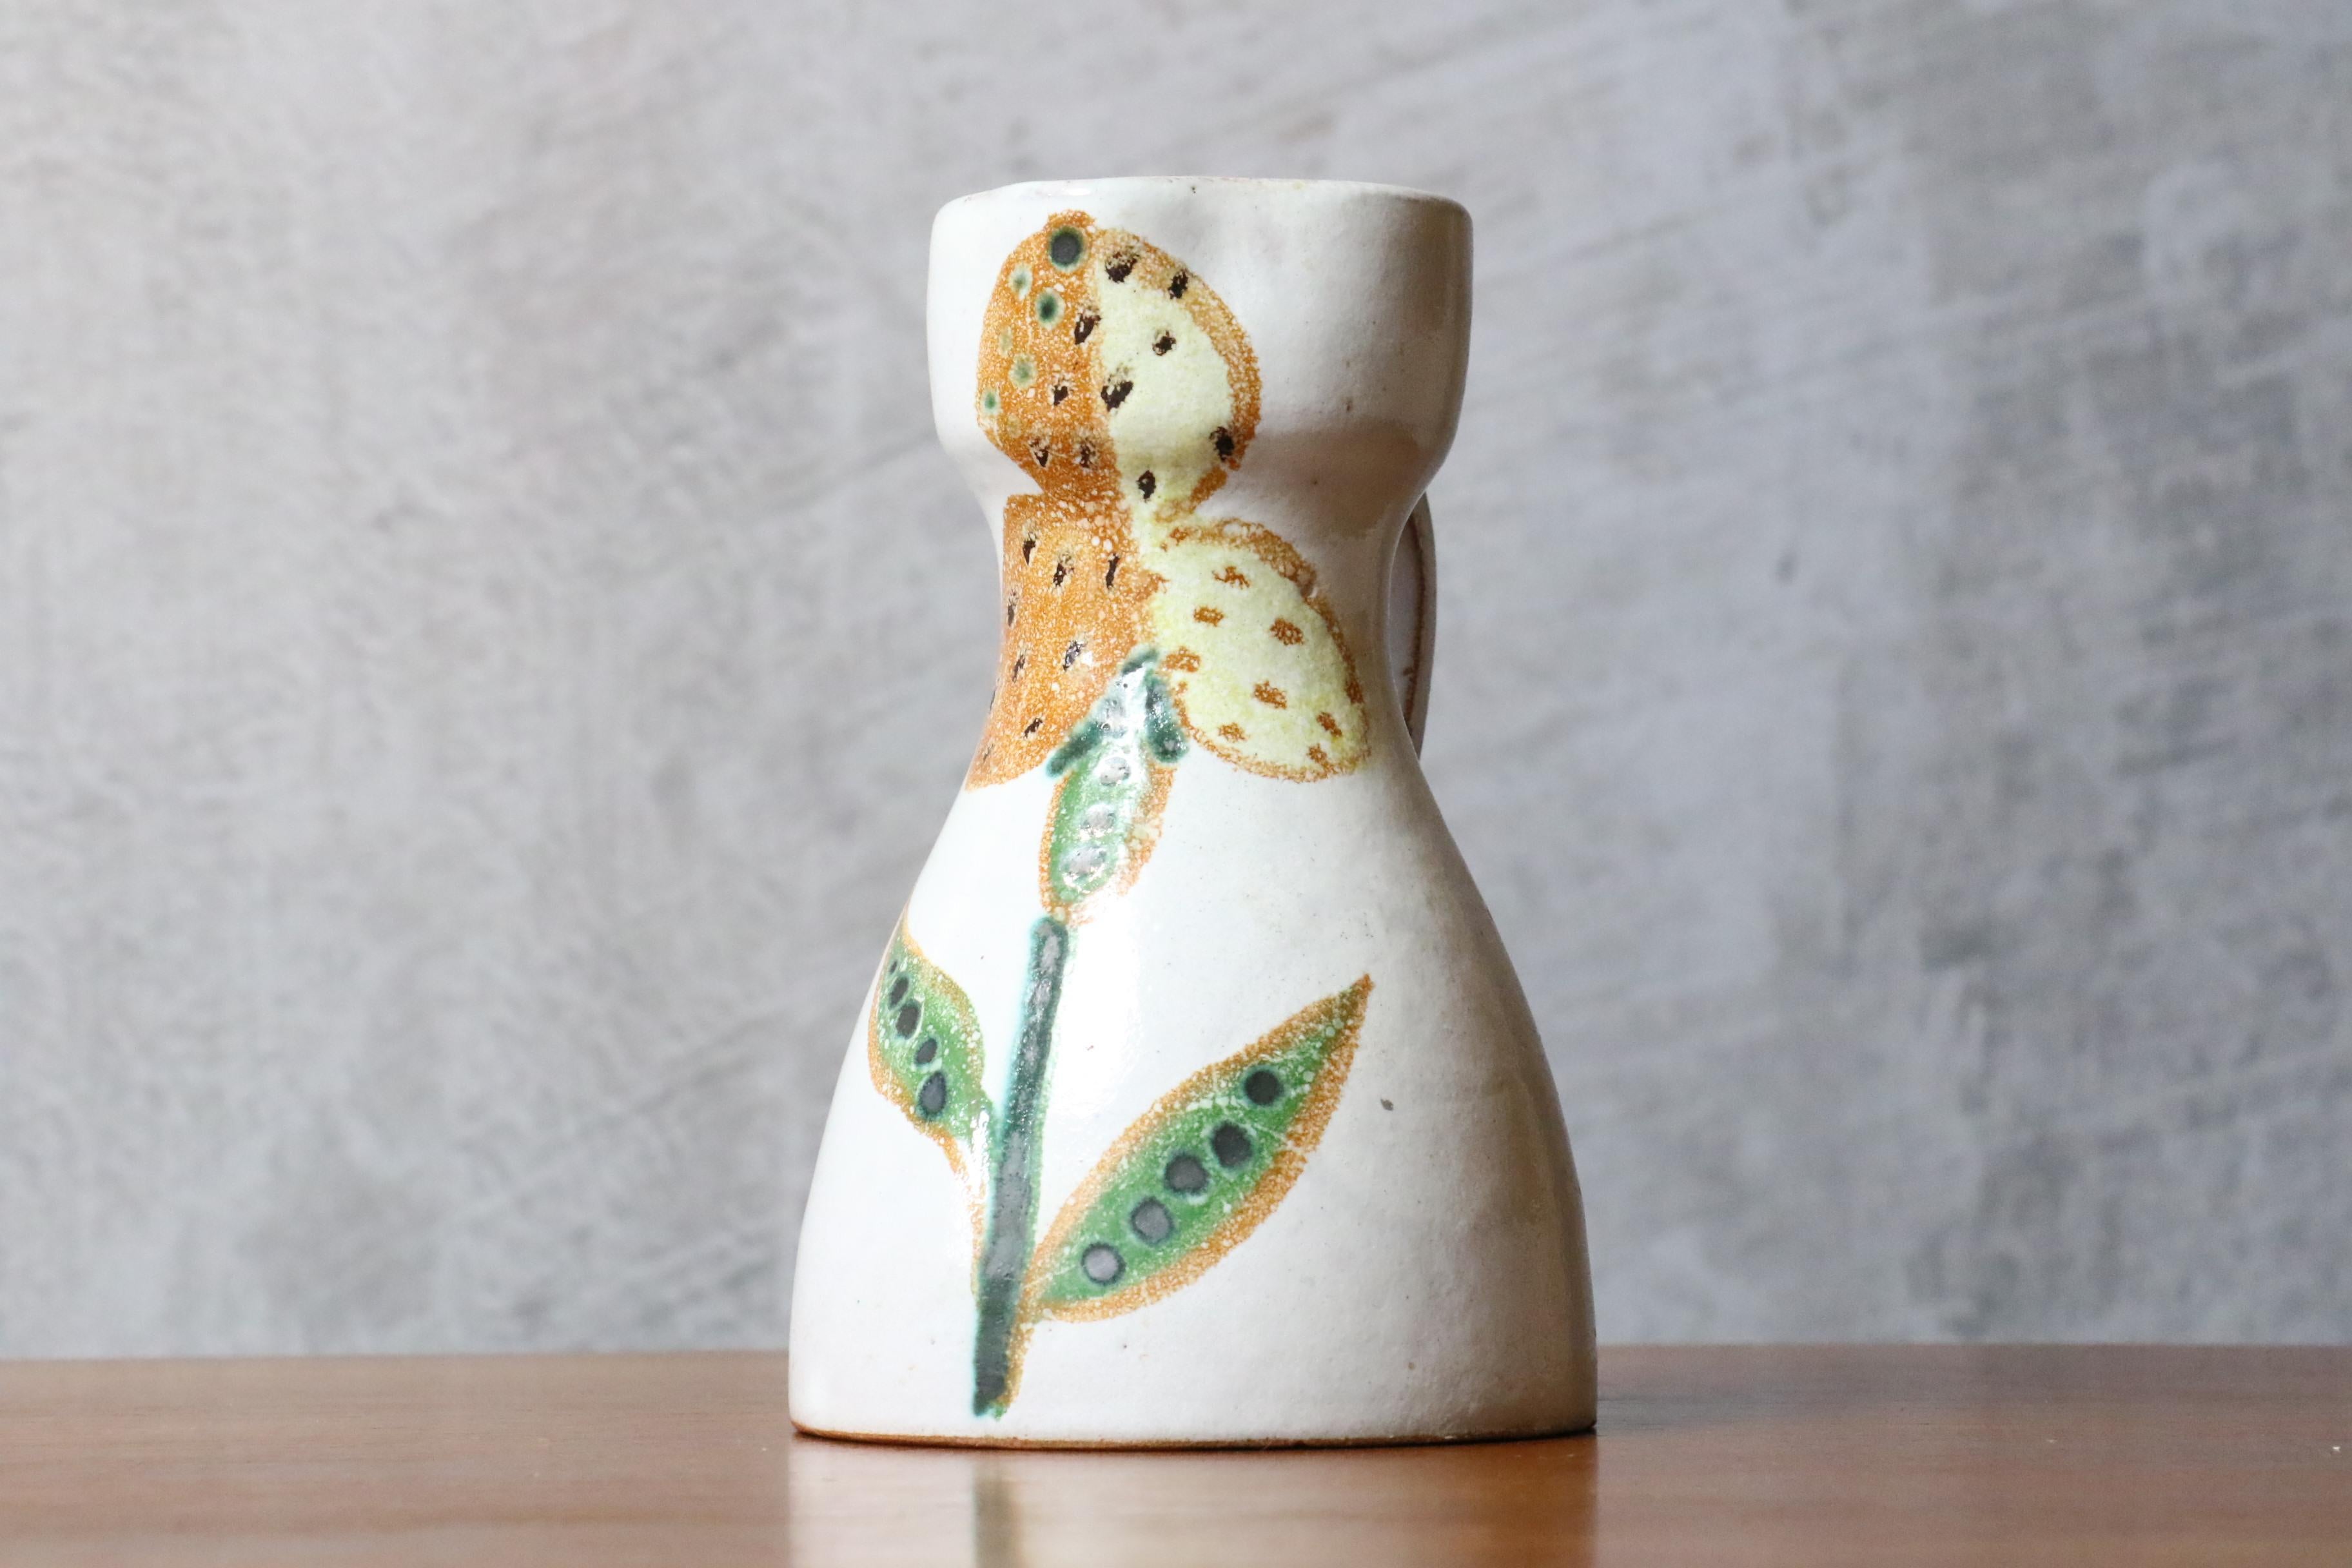 Mid-century French Ceramic Pitcher by Naumovitch - Grand Chêne Studio, Vallauris
Pitcher with a bright white background, it is glazed and decorated in an original way with and orange and yellow flower motif. 
The pitcher is in very good condition.